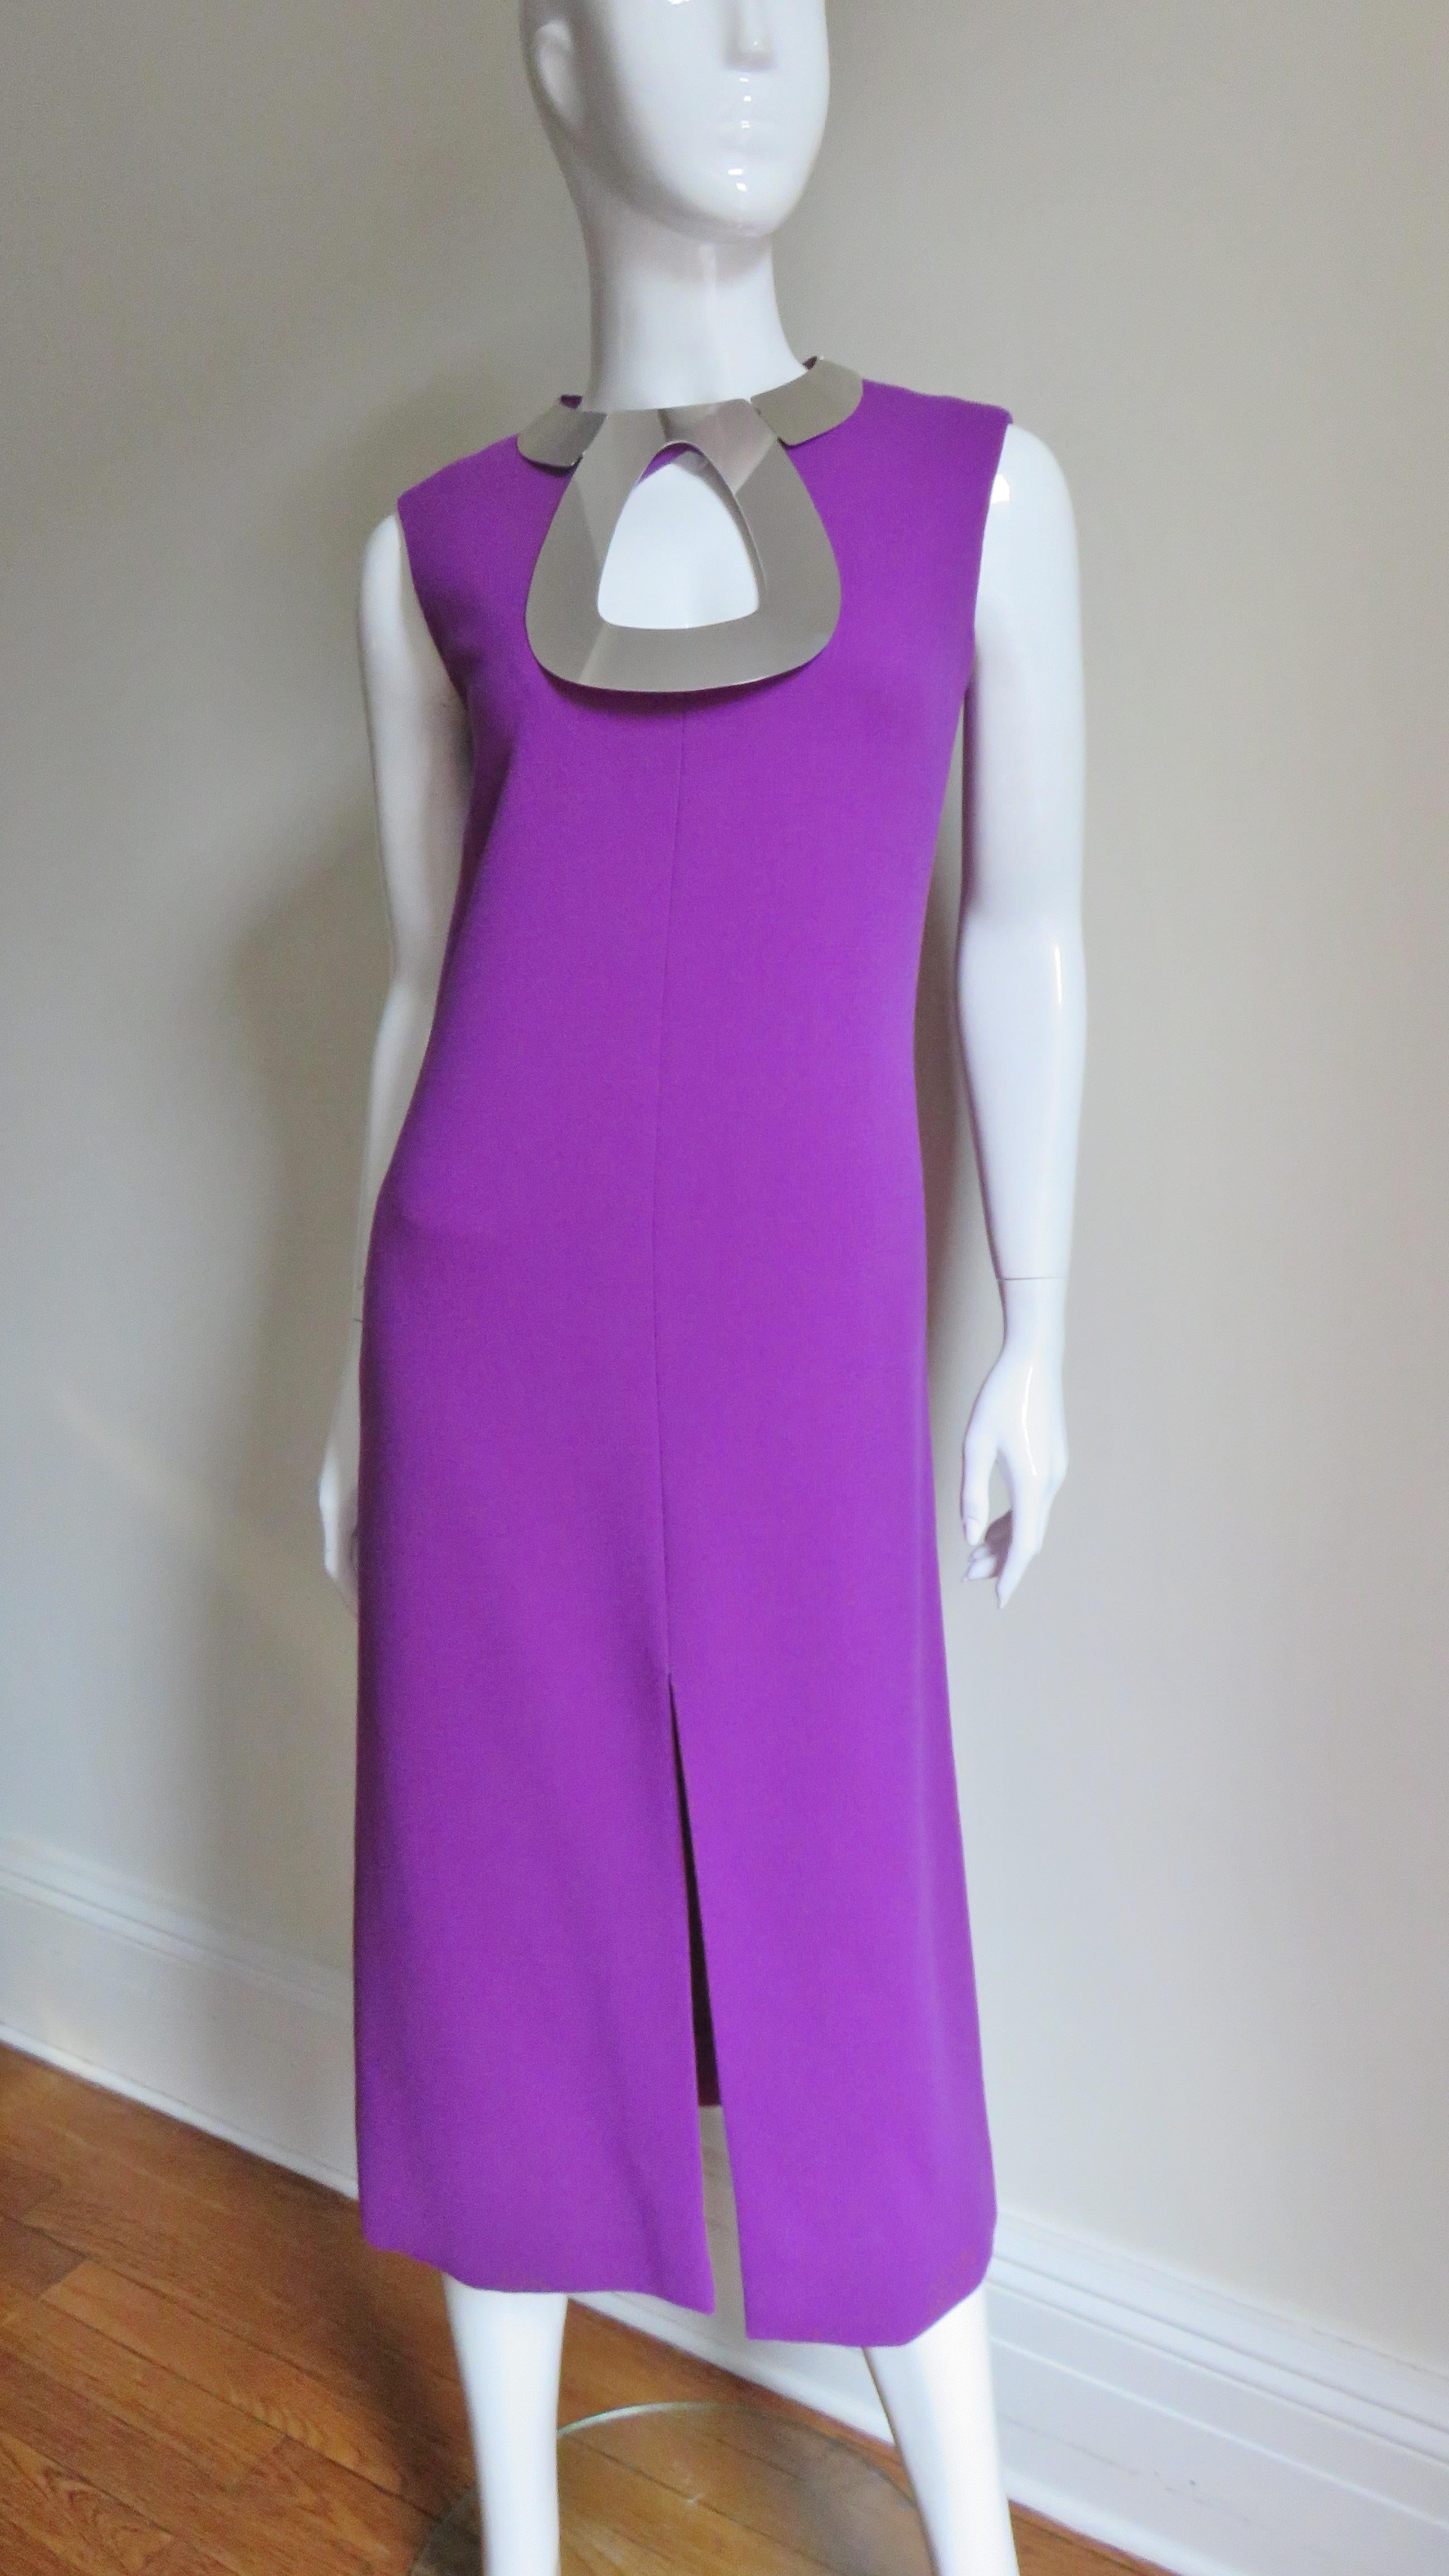 An amazing purple wool dress from Pierre Cardin.  It is sleeveless, skims the body then flares subtly to midi length with a center front slit.  Around the neckline is a stunning silver metal hardware articulated collar framing the neck and a large